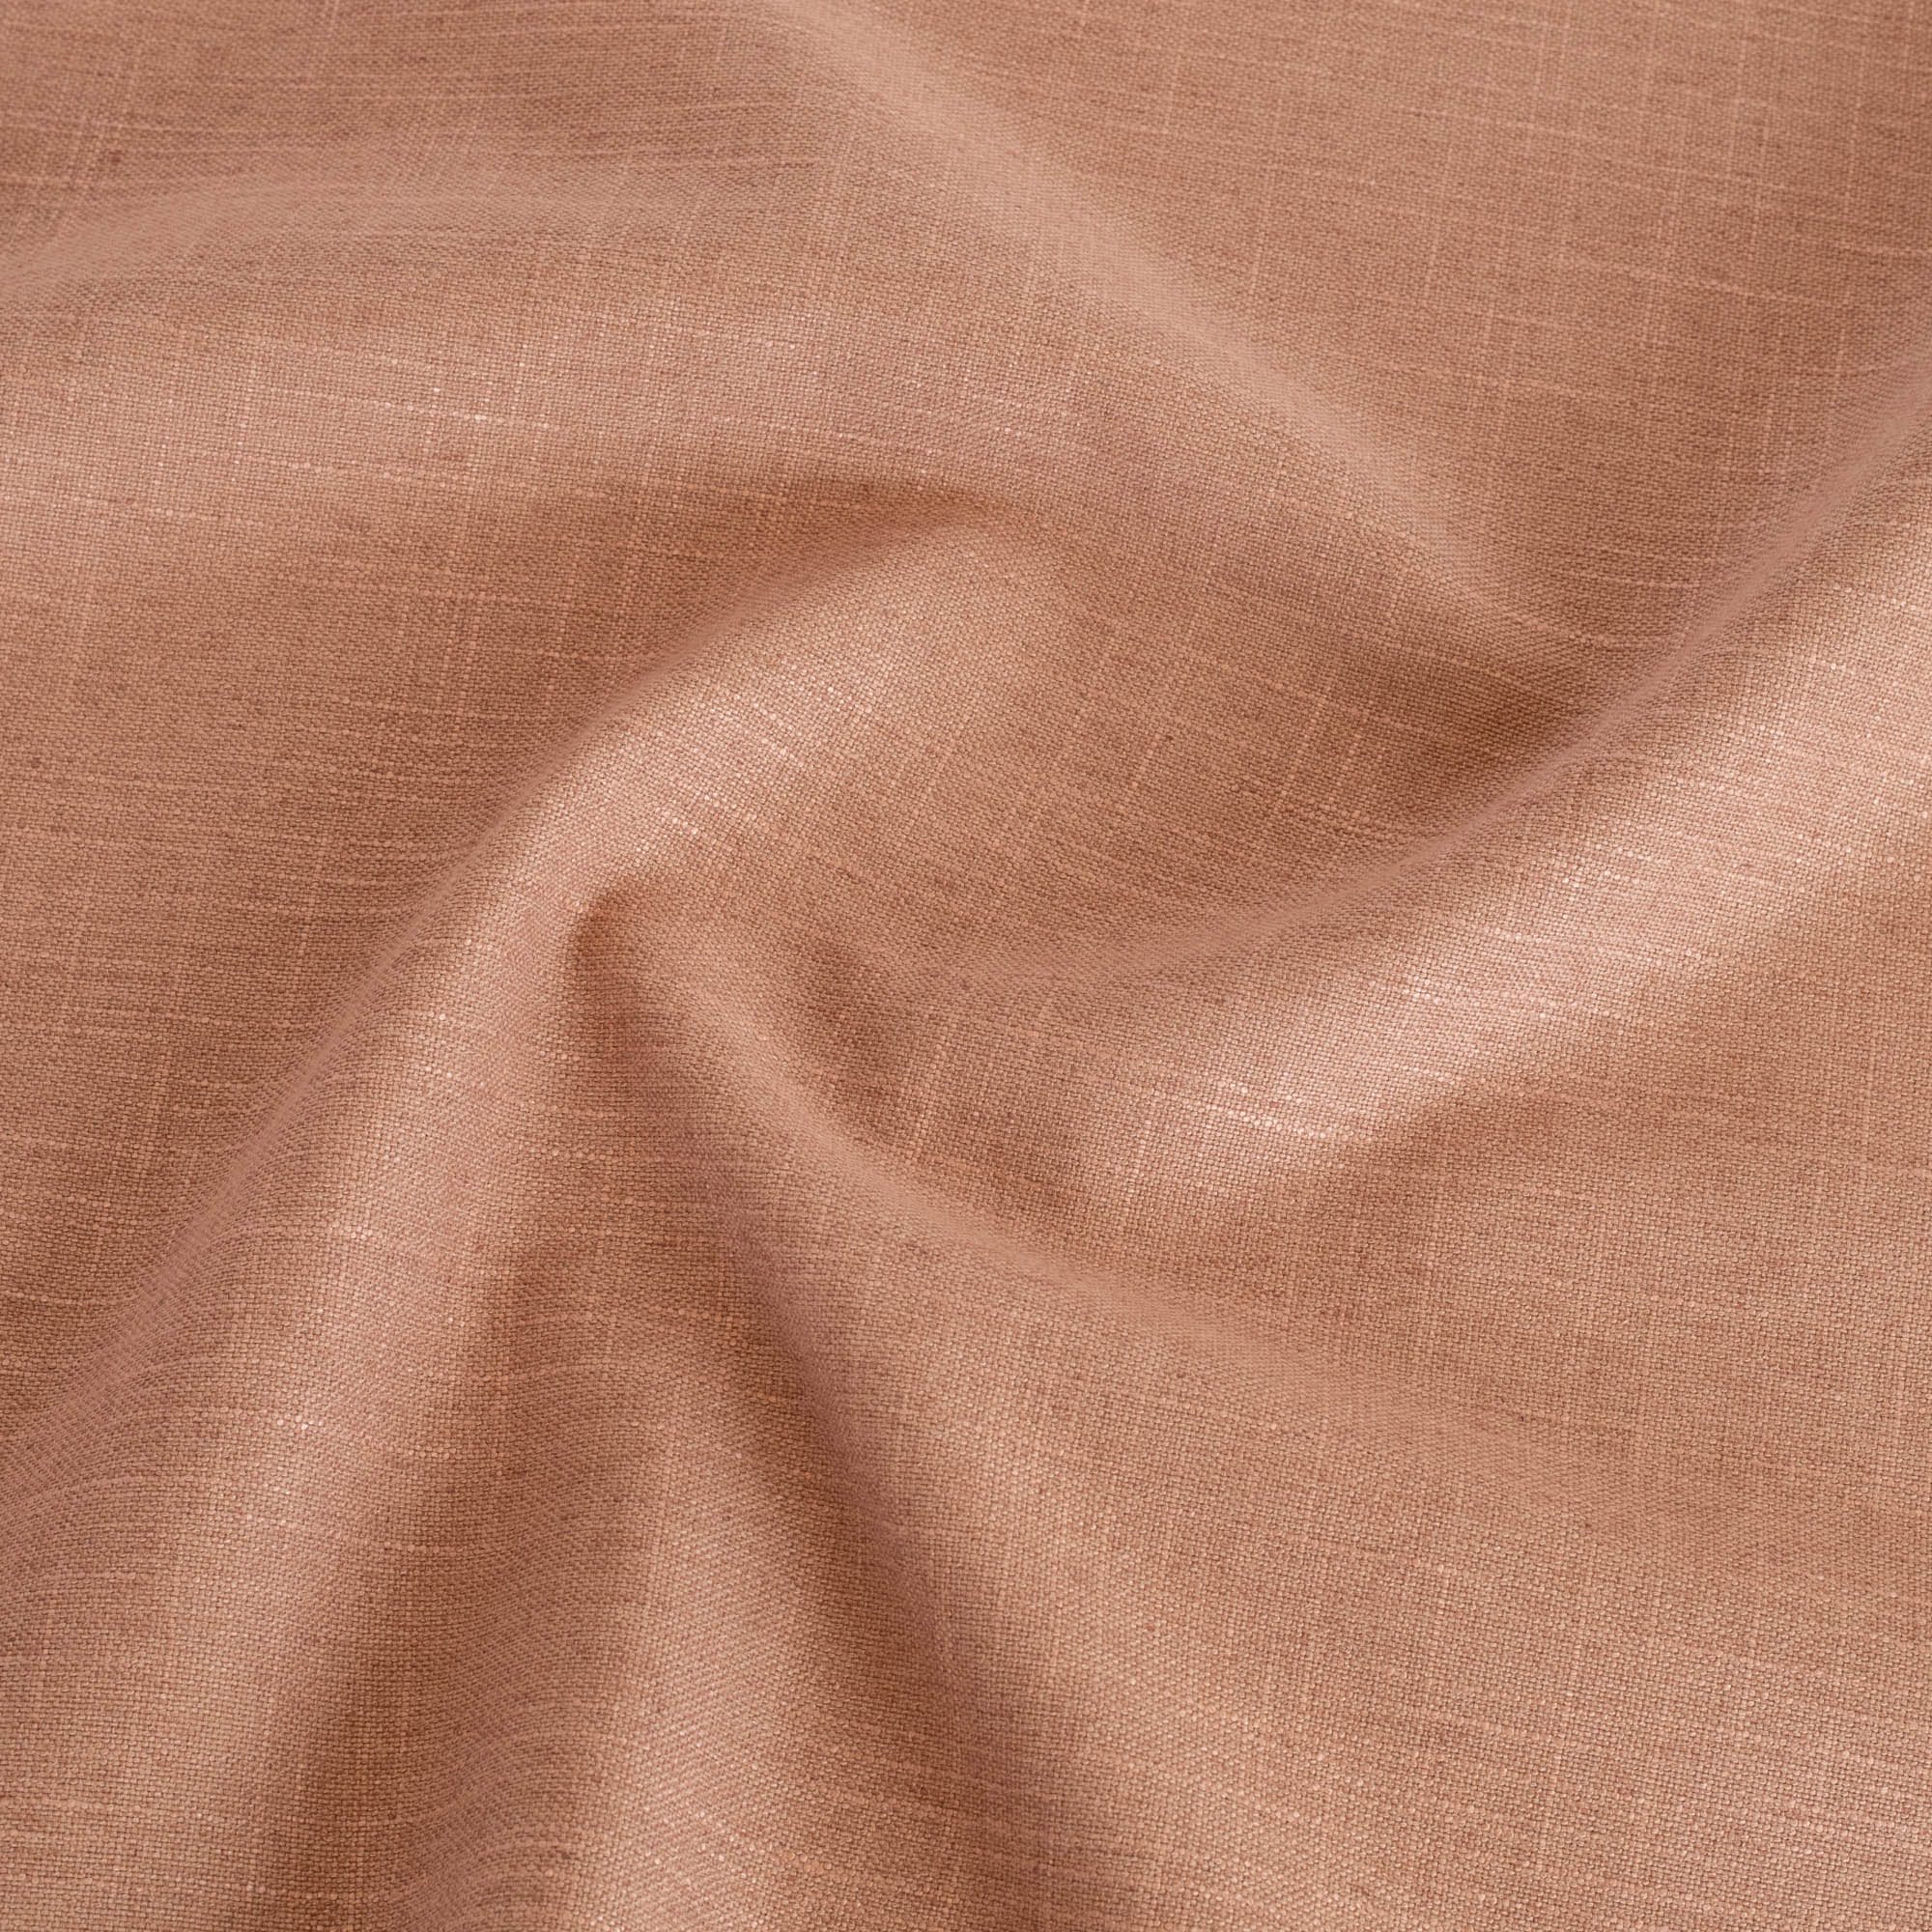 a warm terracotta stain resistant home decor fabric from tonic living